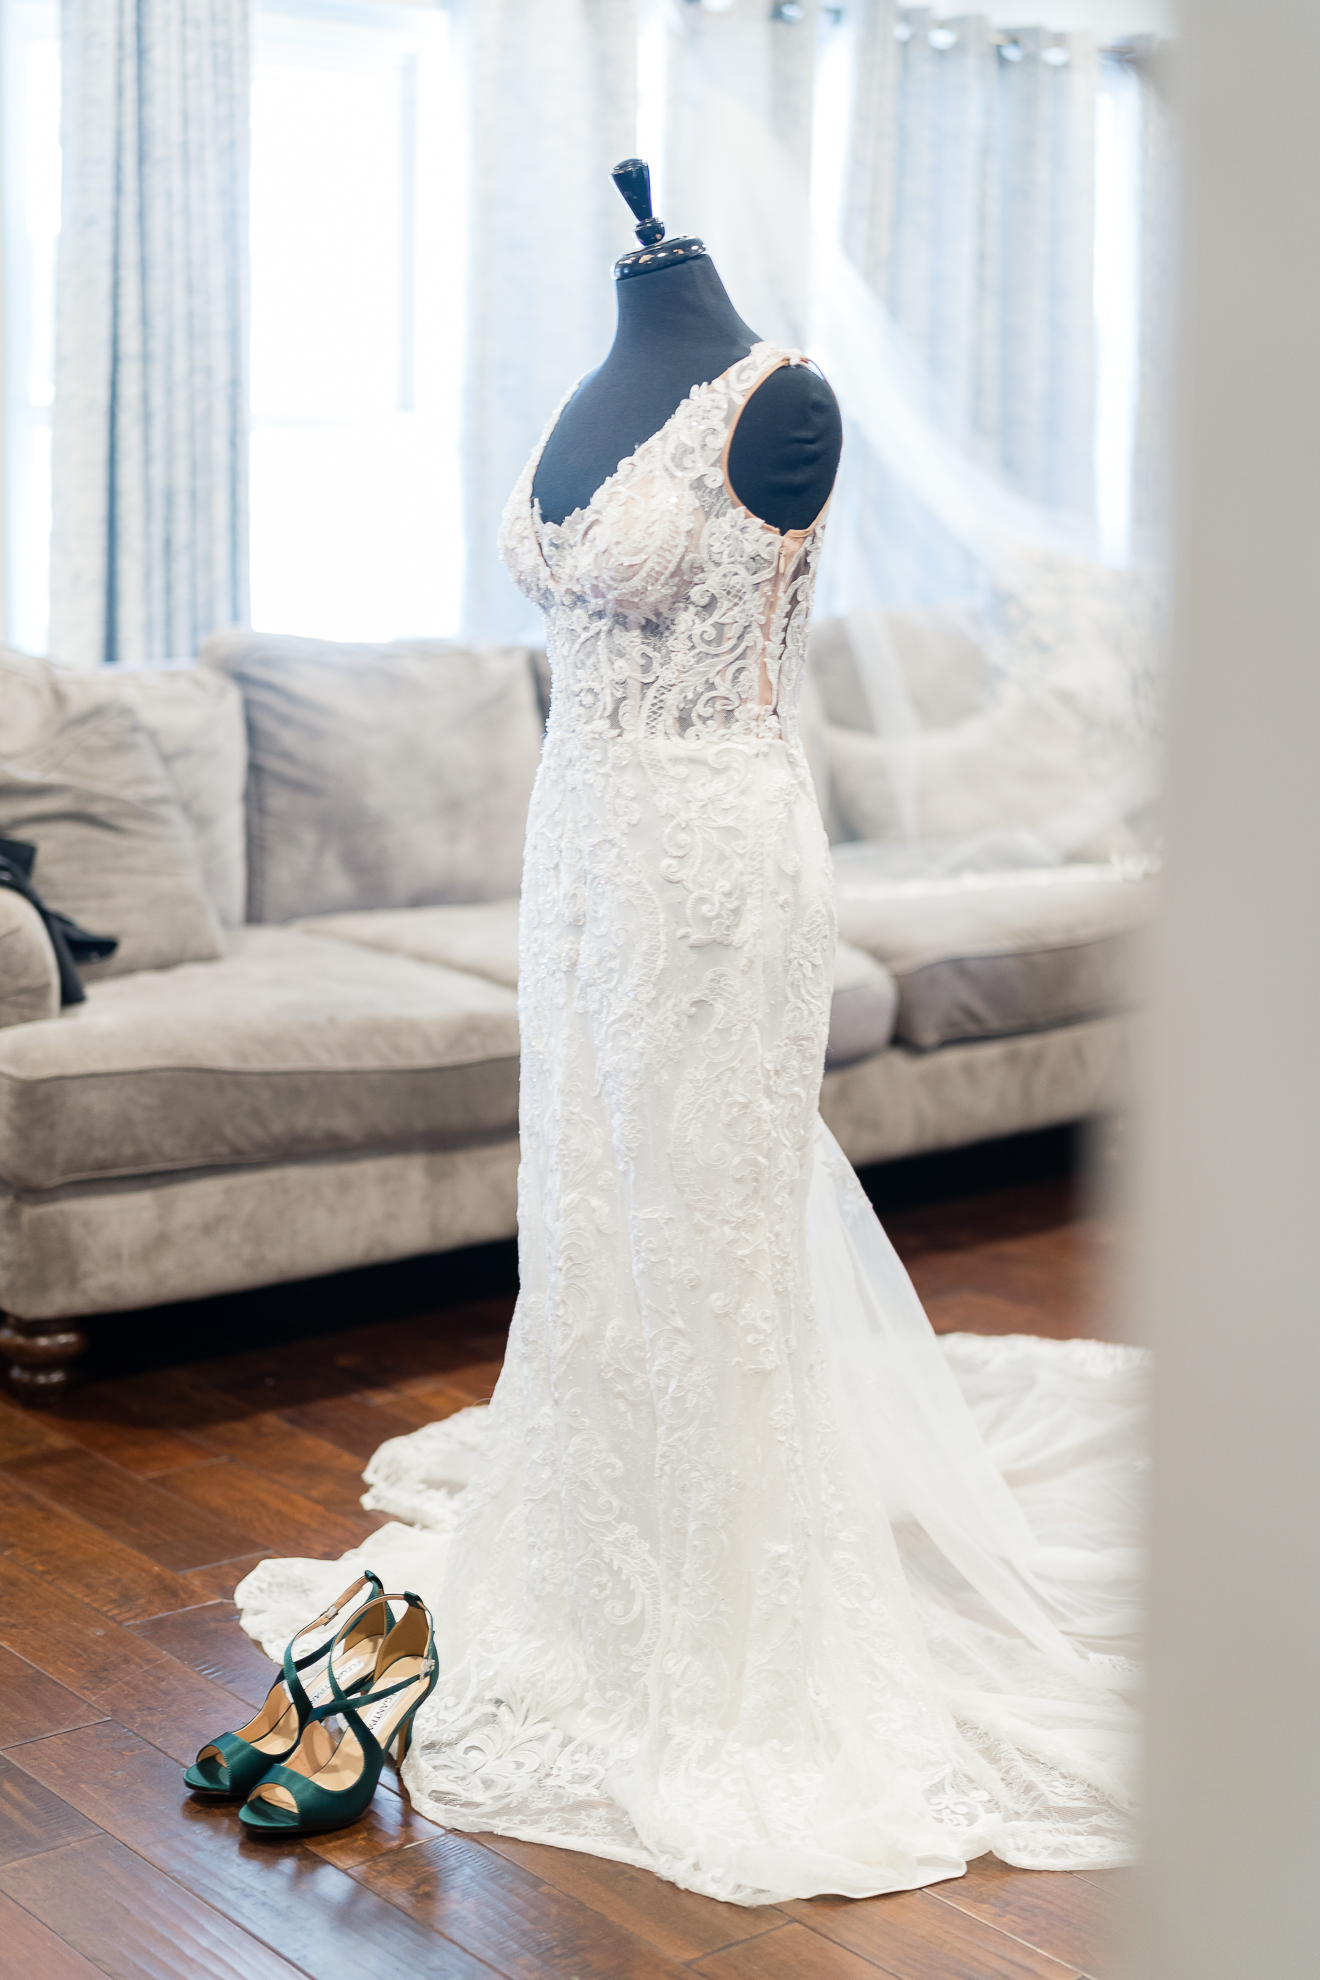 ThomasKim_photography A wedding dress on a mannequin in front of a couch (S).